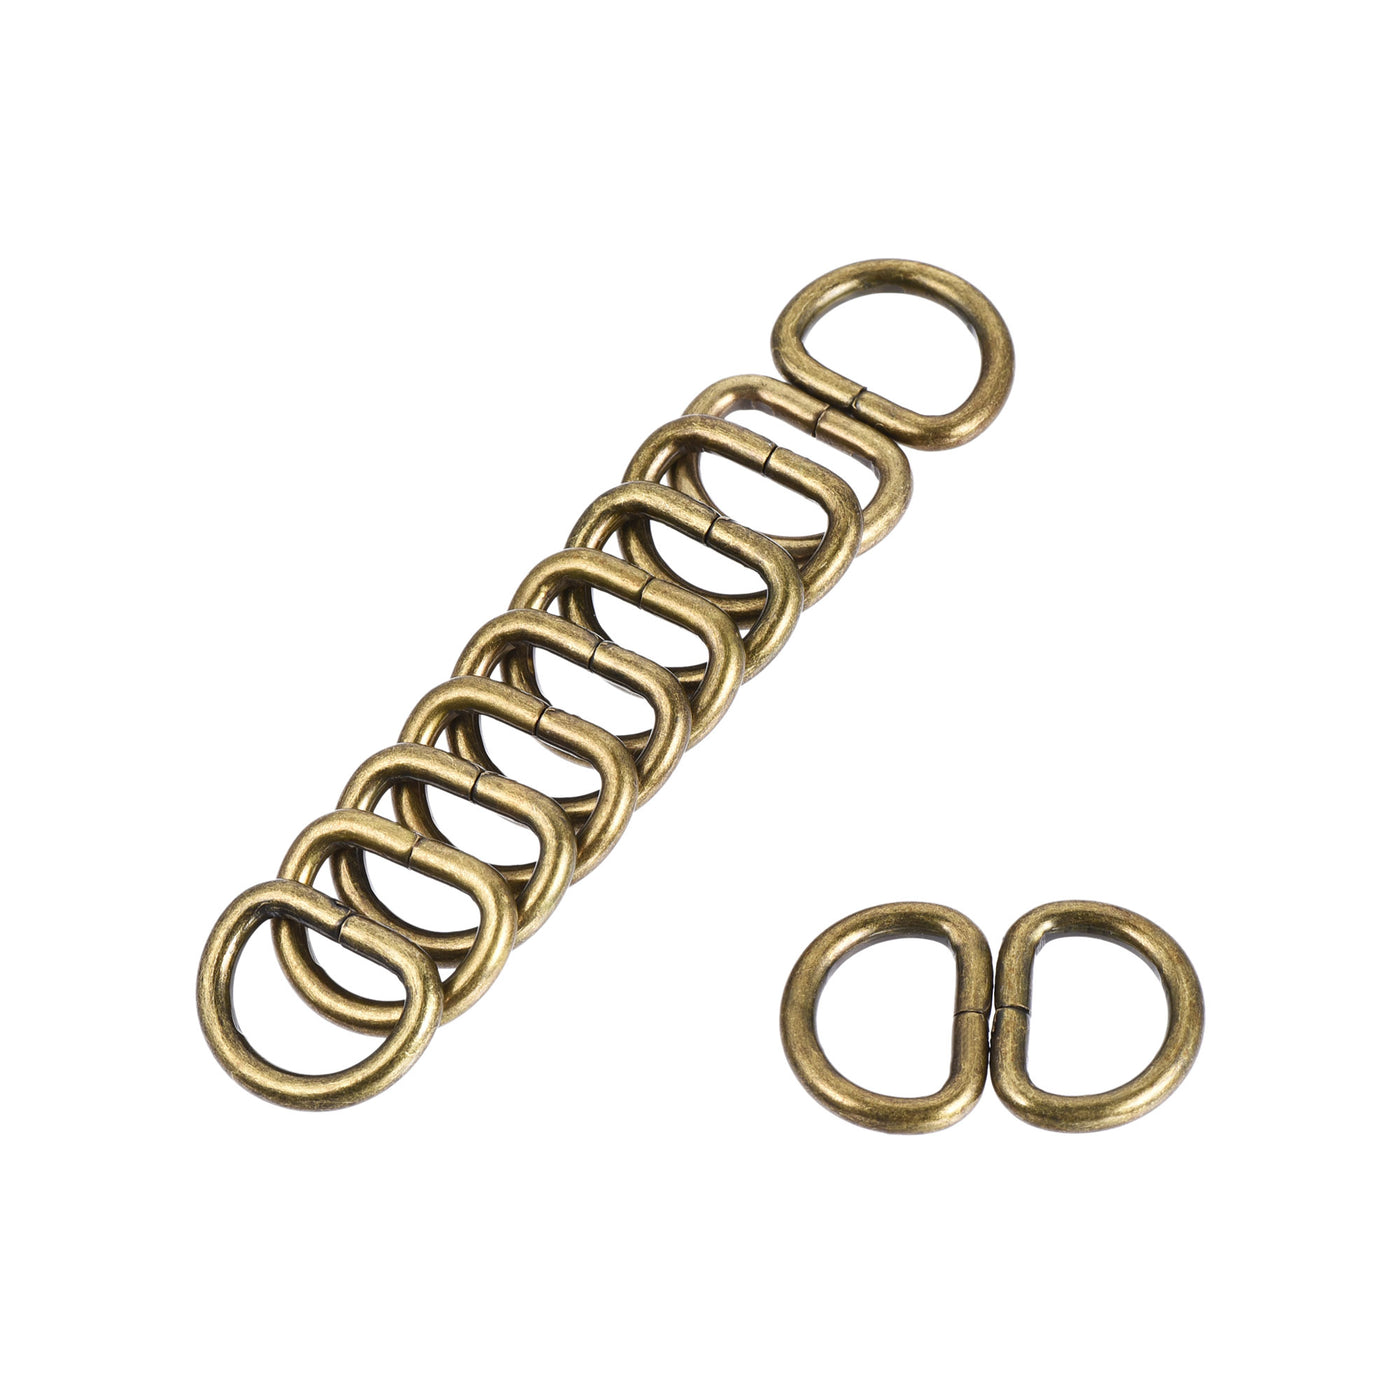 uxcell Uxcell Metal D Ring 0.51"(13mm) D-Rings Buckle for Hardware Bags Belts Craft DIY Accessories Bronze Tone 50pcs